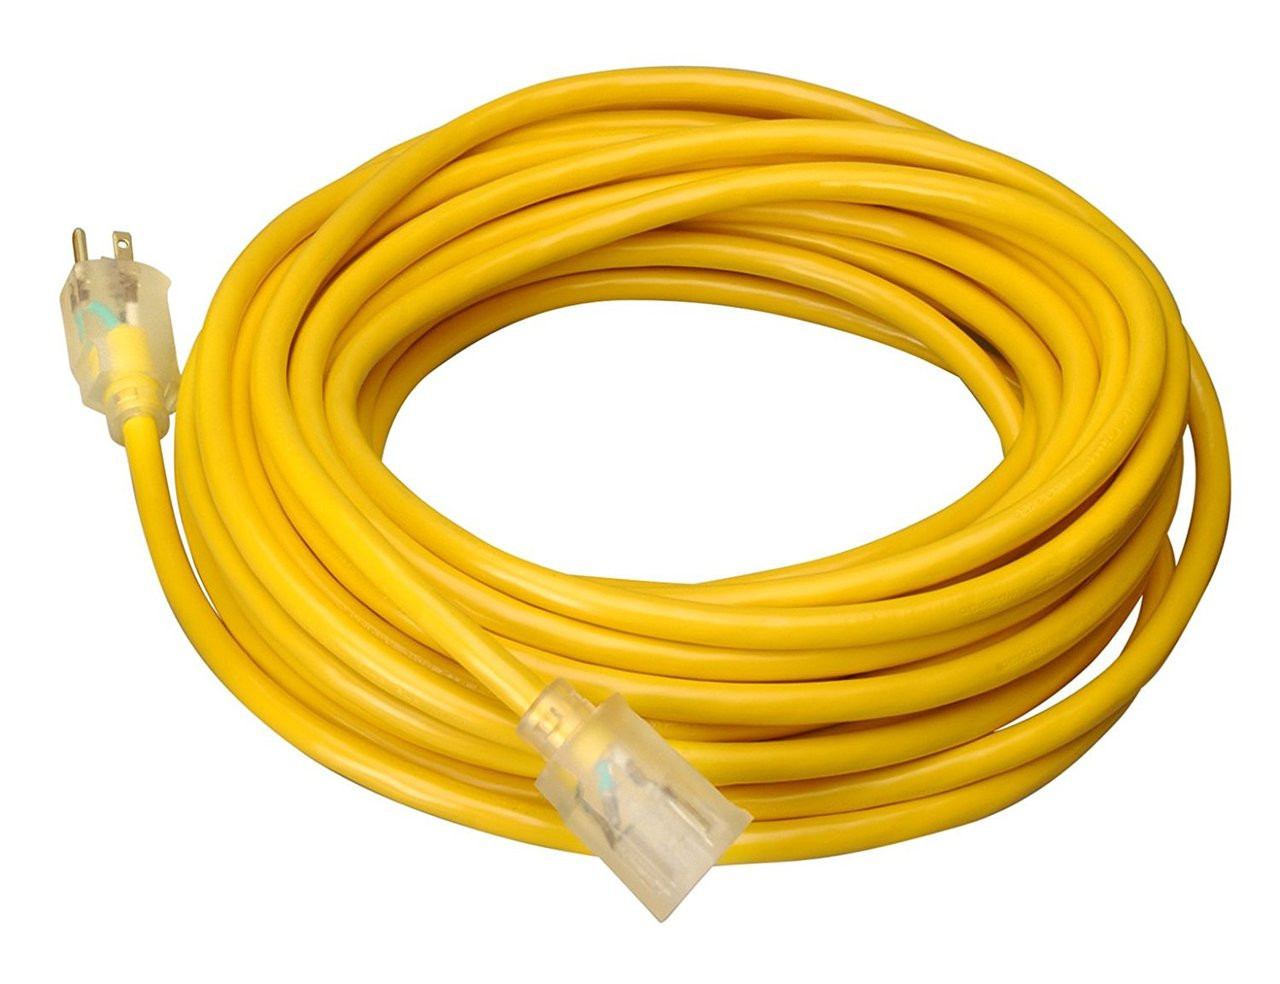 Coleman Cable 100' Yellow & Purple 12/3 Outdoor Extension Cord